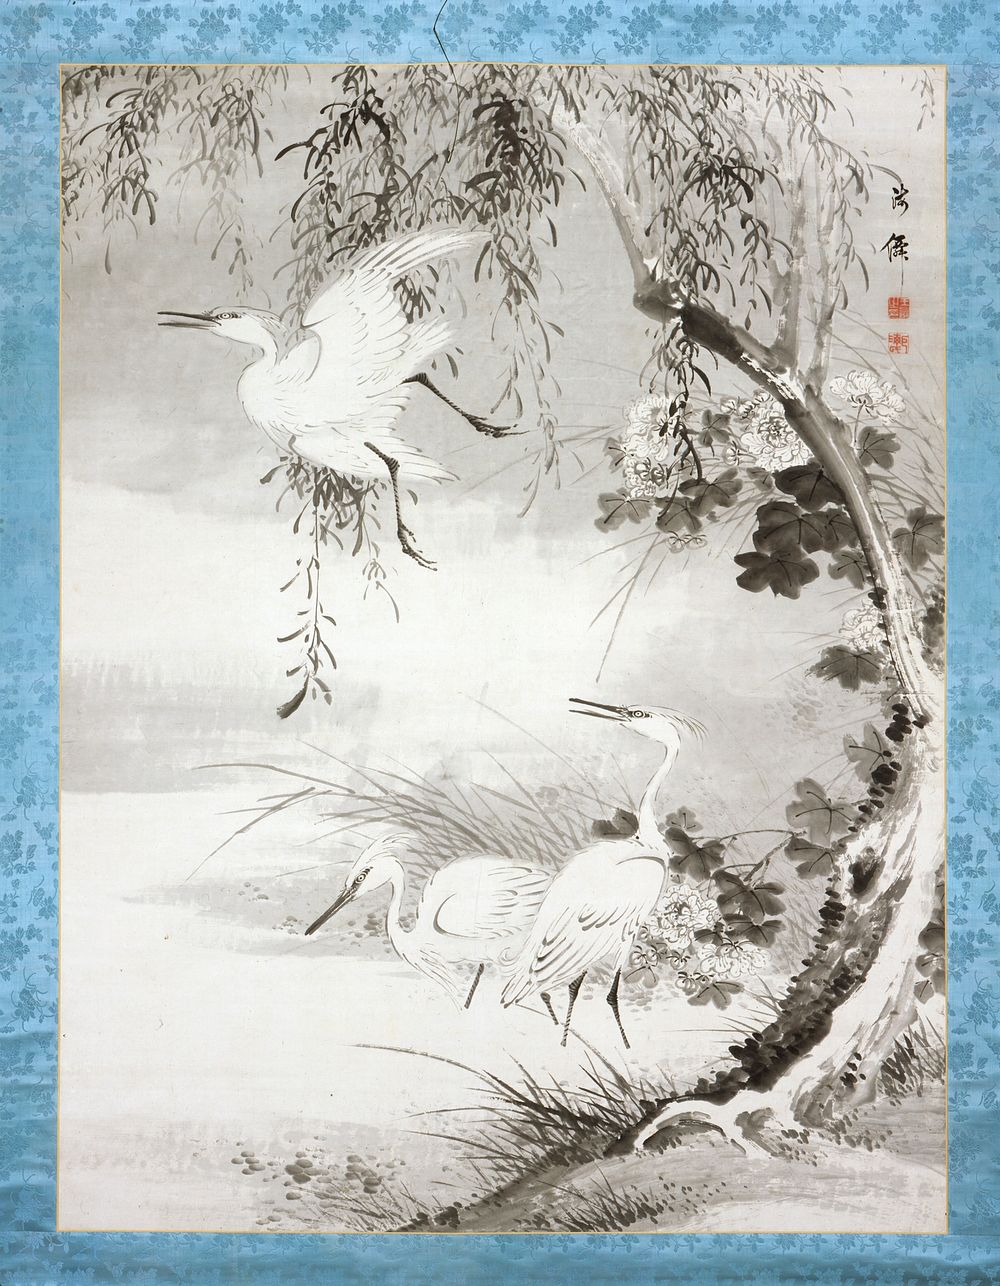 Herons and Willow by Oda Kaisen